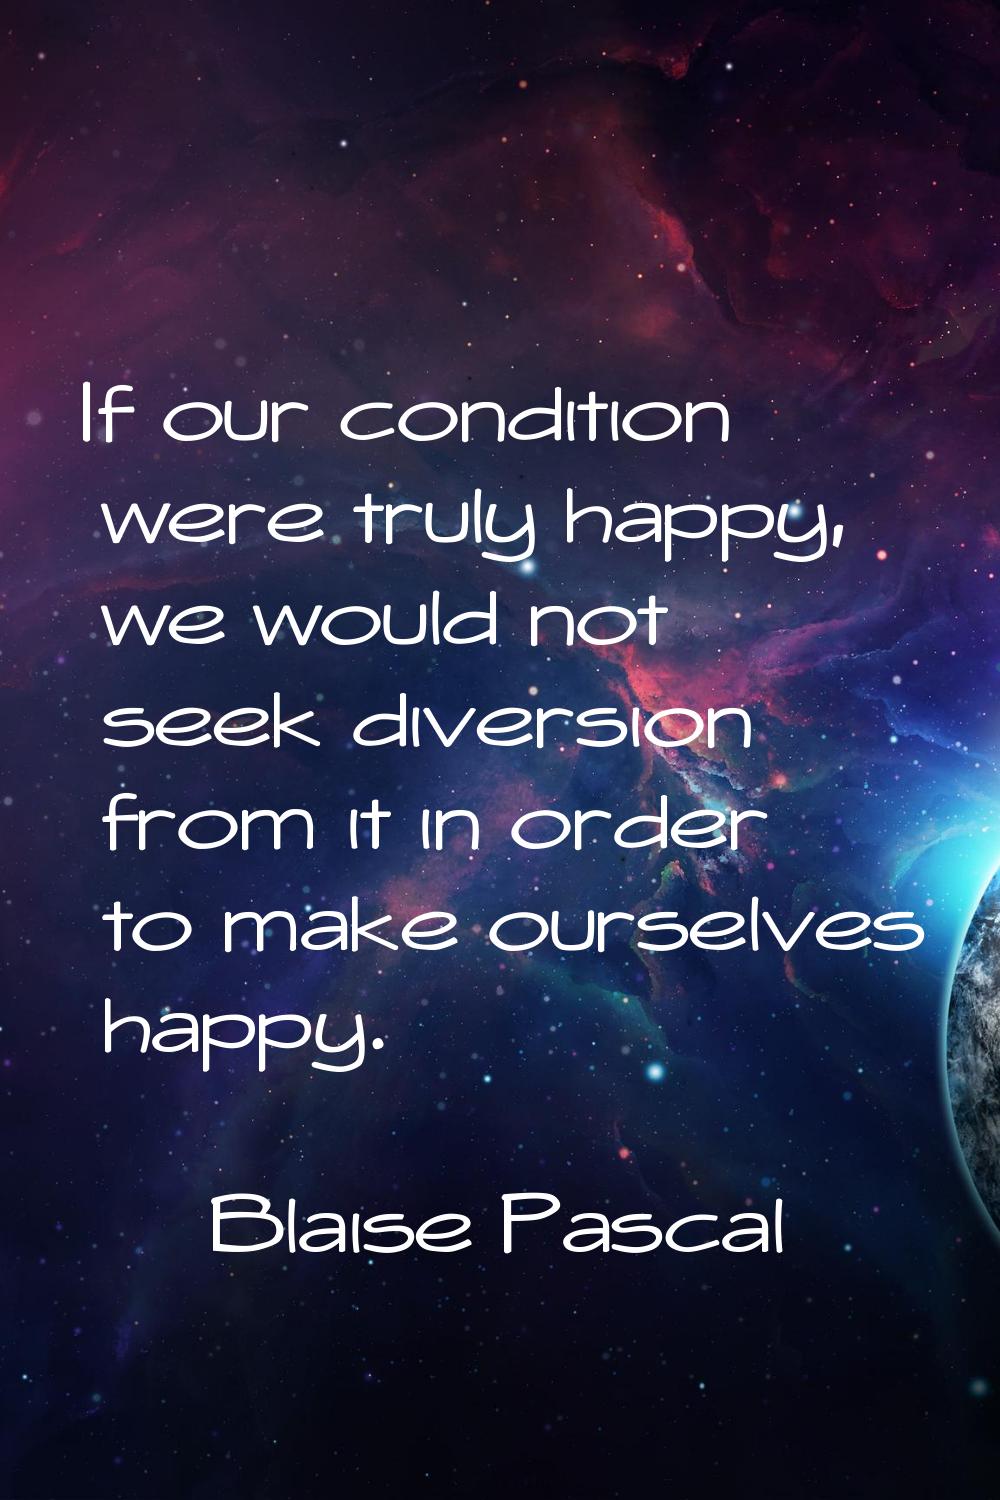 If our condition were truly happy, we would not seek diversion from it in order to make ourselves h